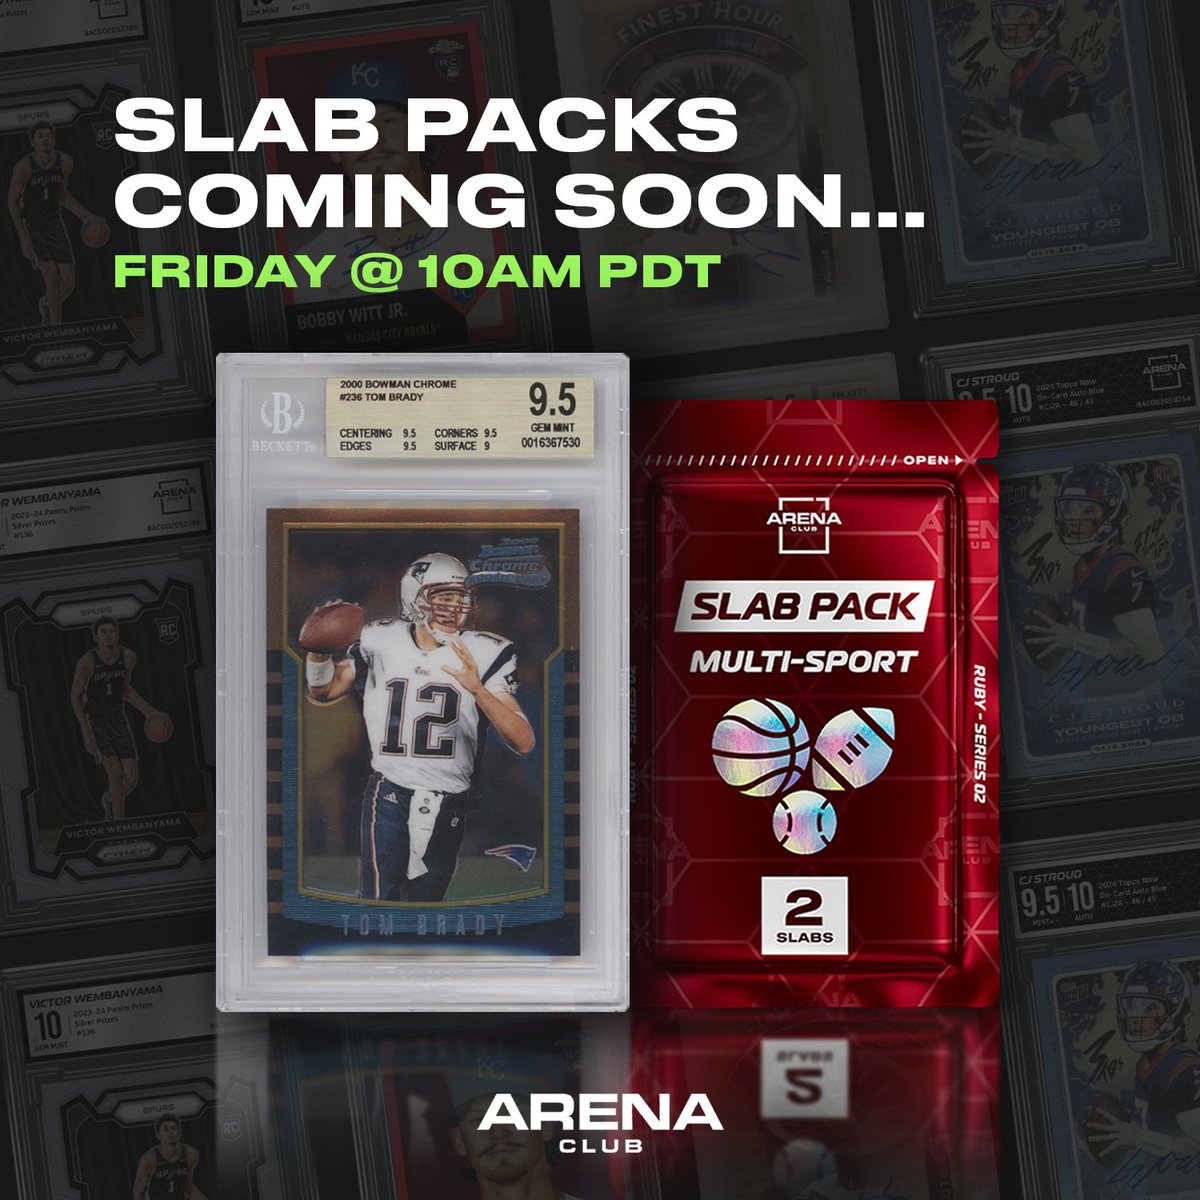 Who's ready for the drop on Friday at 10AM PT? 👀 🔥 What pack are you going to rip? 🤔 #slabpacks #arenaclub #whodoyoucollect